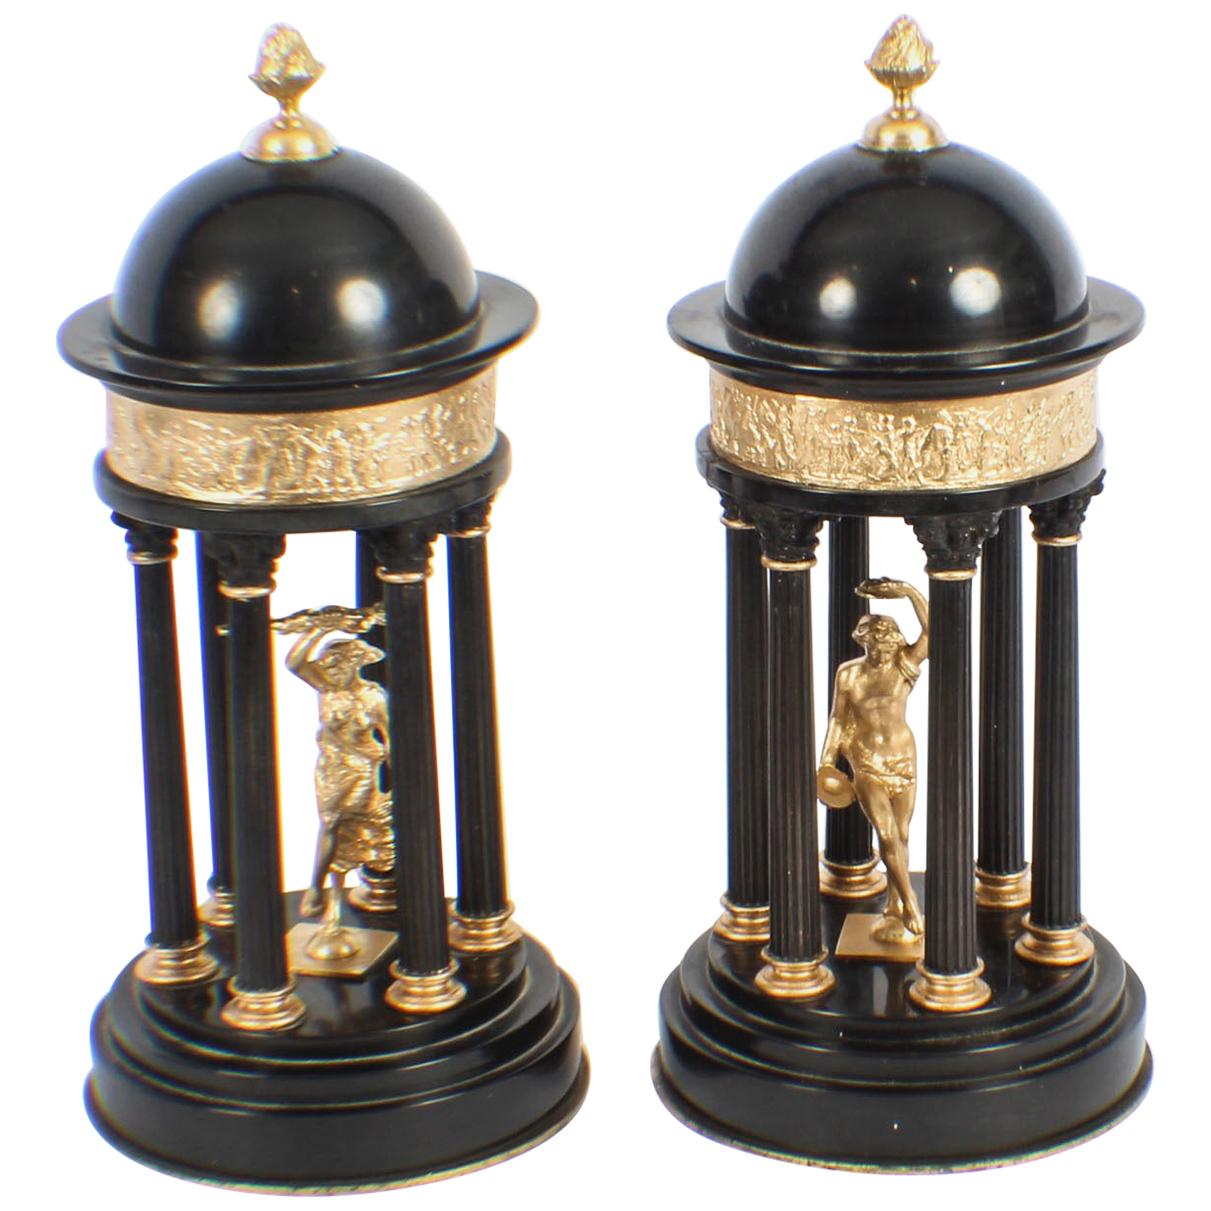 Antique Pair of Grand Tour Marble & Ormolu Colonnade Temple Models, 19th Century